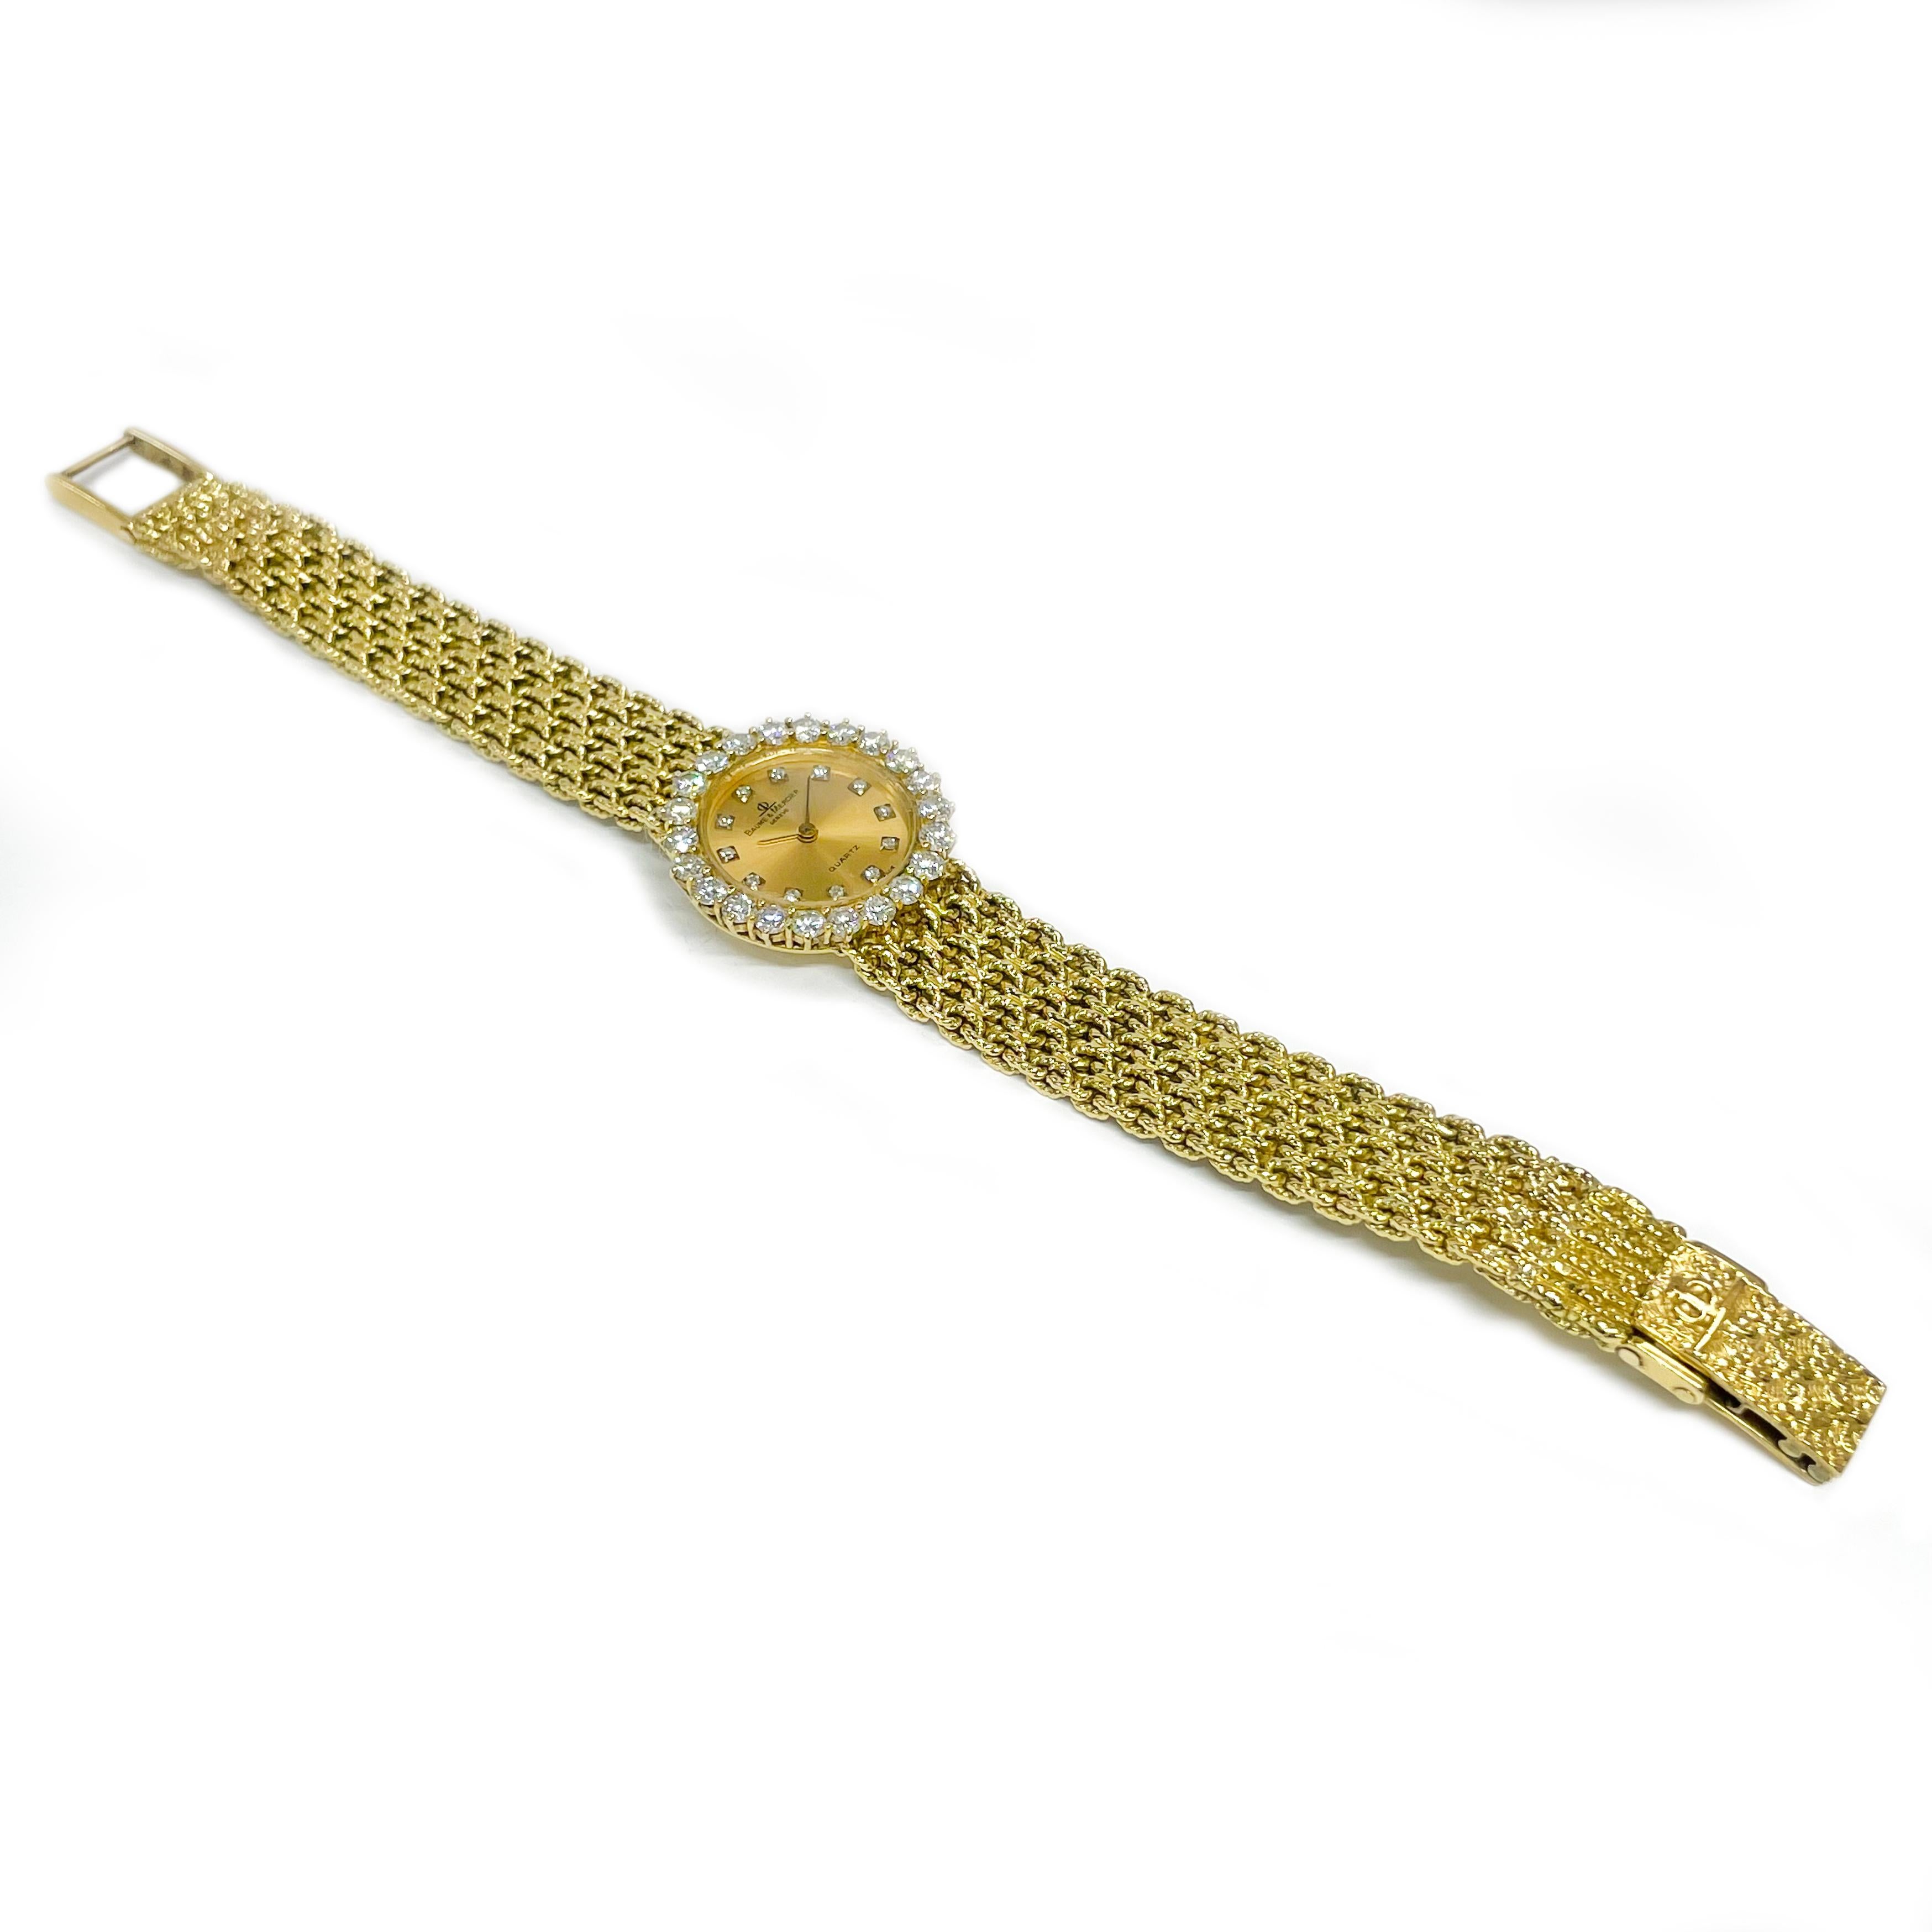 Baume & Mercier 18 Karat Yellow Gold Diamond Quartz movement Wristwatch. The watch features a round gold dial with hour and minute hands and round diamonds set at each hour. Set around the bezel are twenty-two 3mm brilliant-cut round diamonds. The